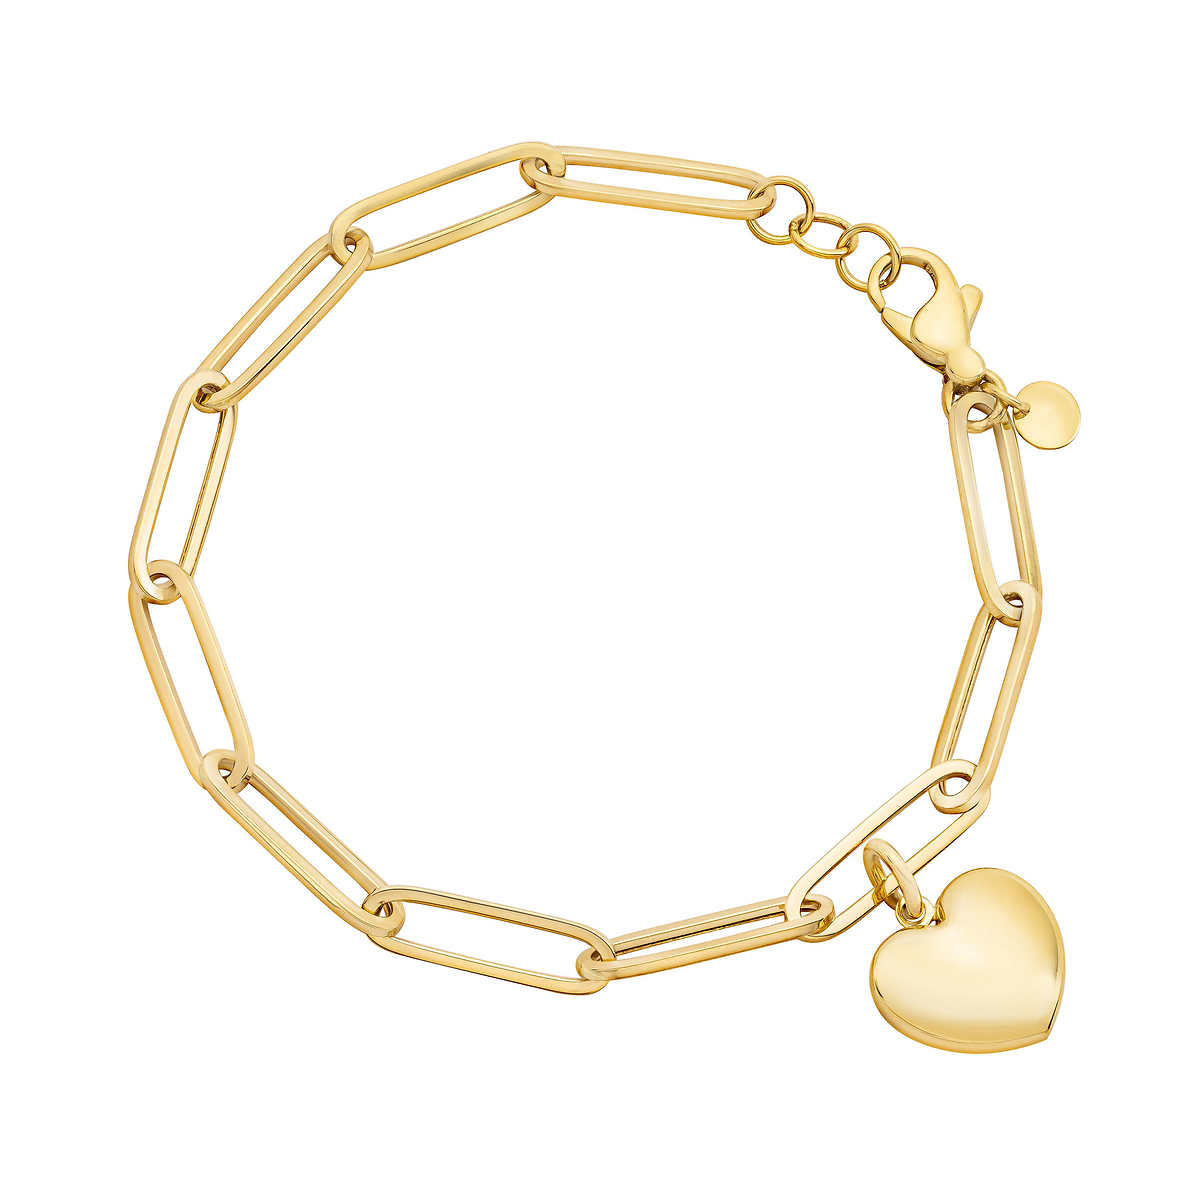 Made in Italy Heart Link Bracelet with Small Heart Lock